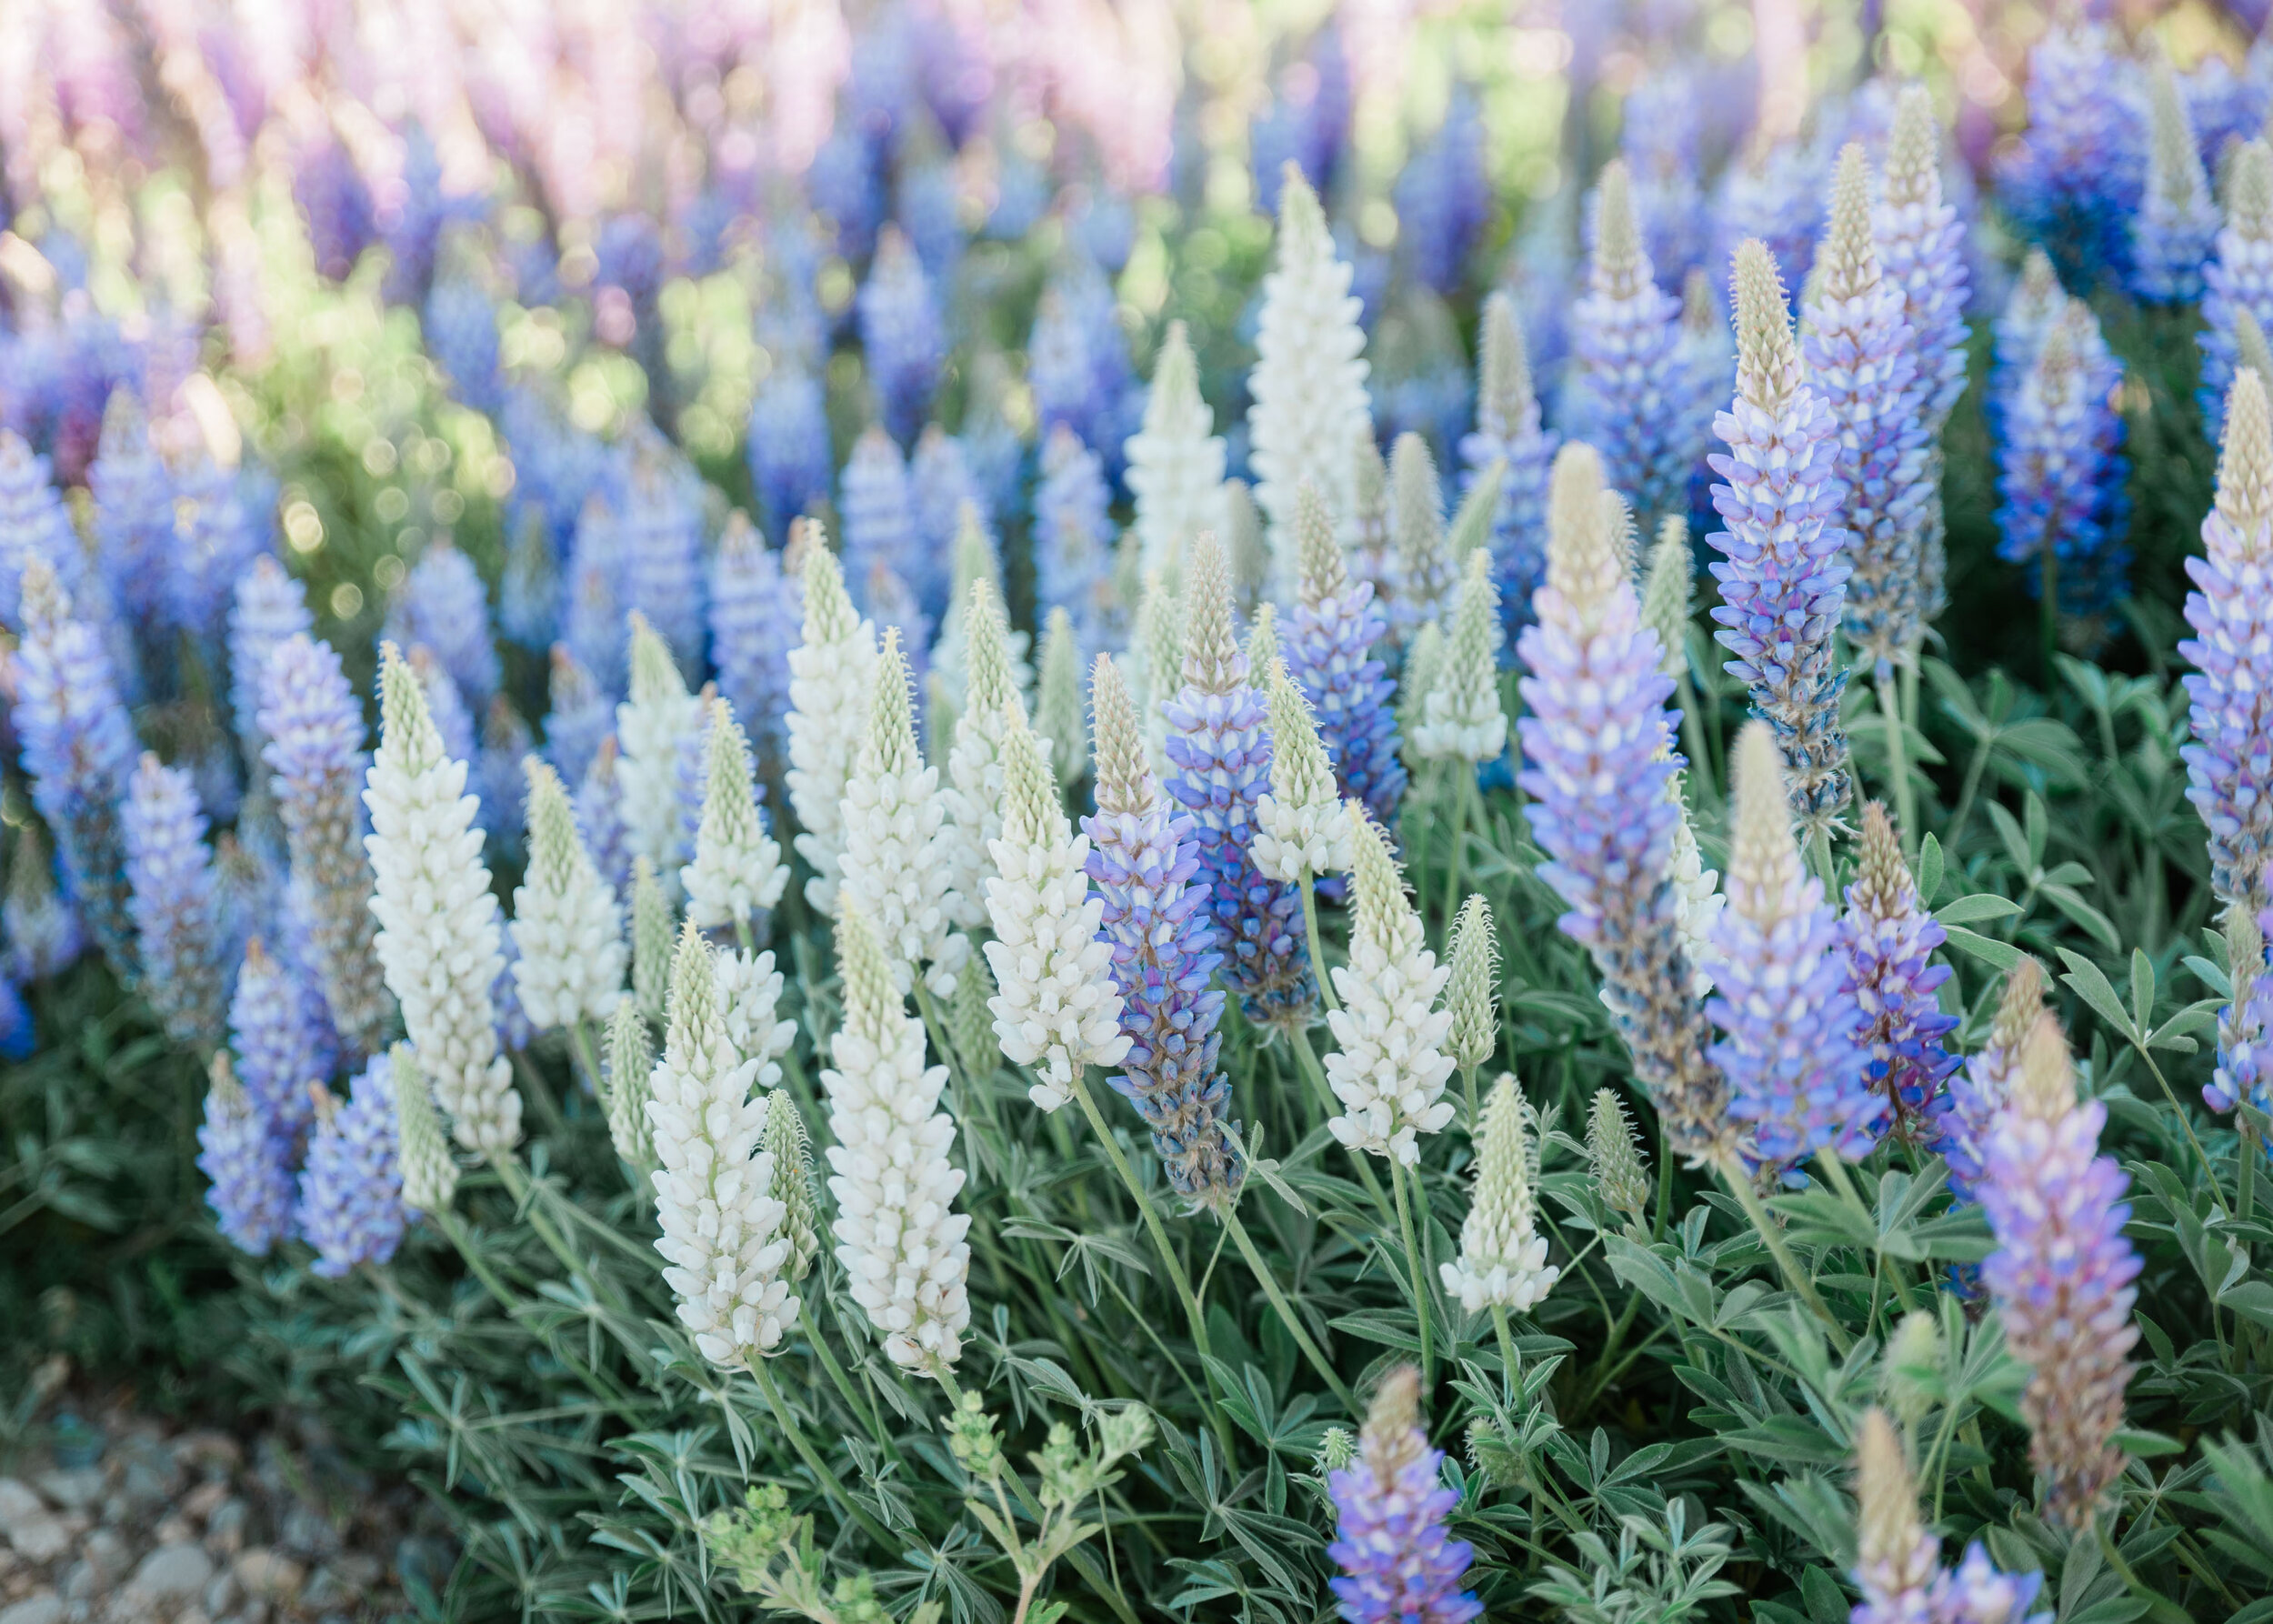 Lupine Wildflowers in Truckee, Engagement Photographers in Tahoe - Kelli Price Photography